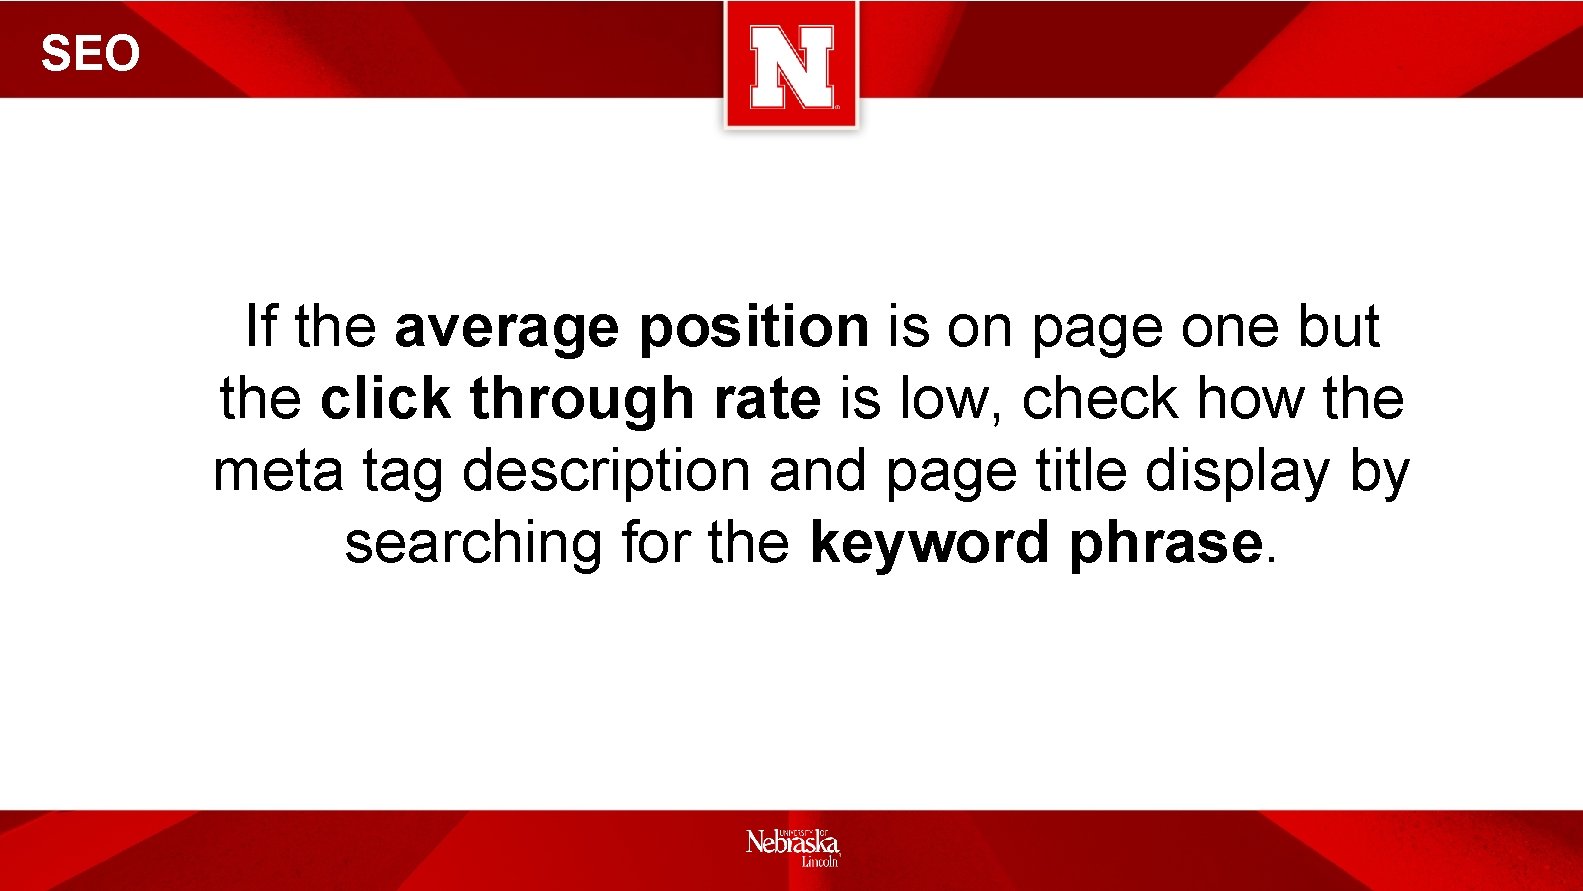 SEO If the average position is on page one but the click through rate